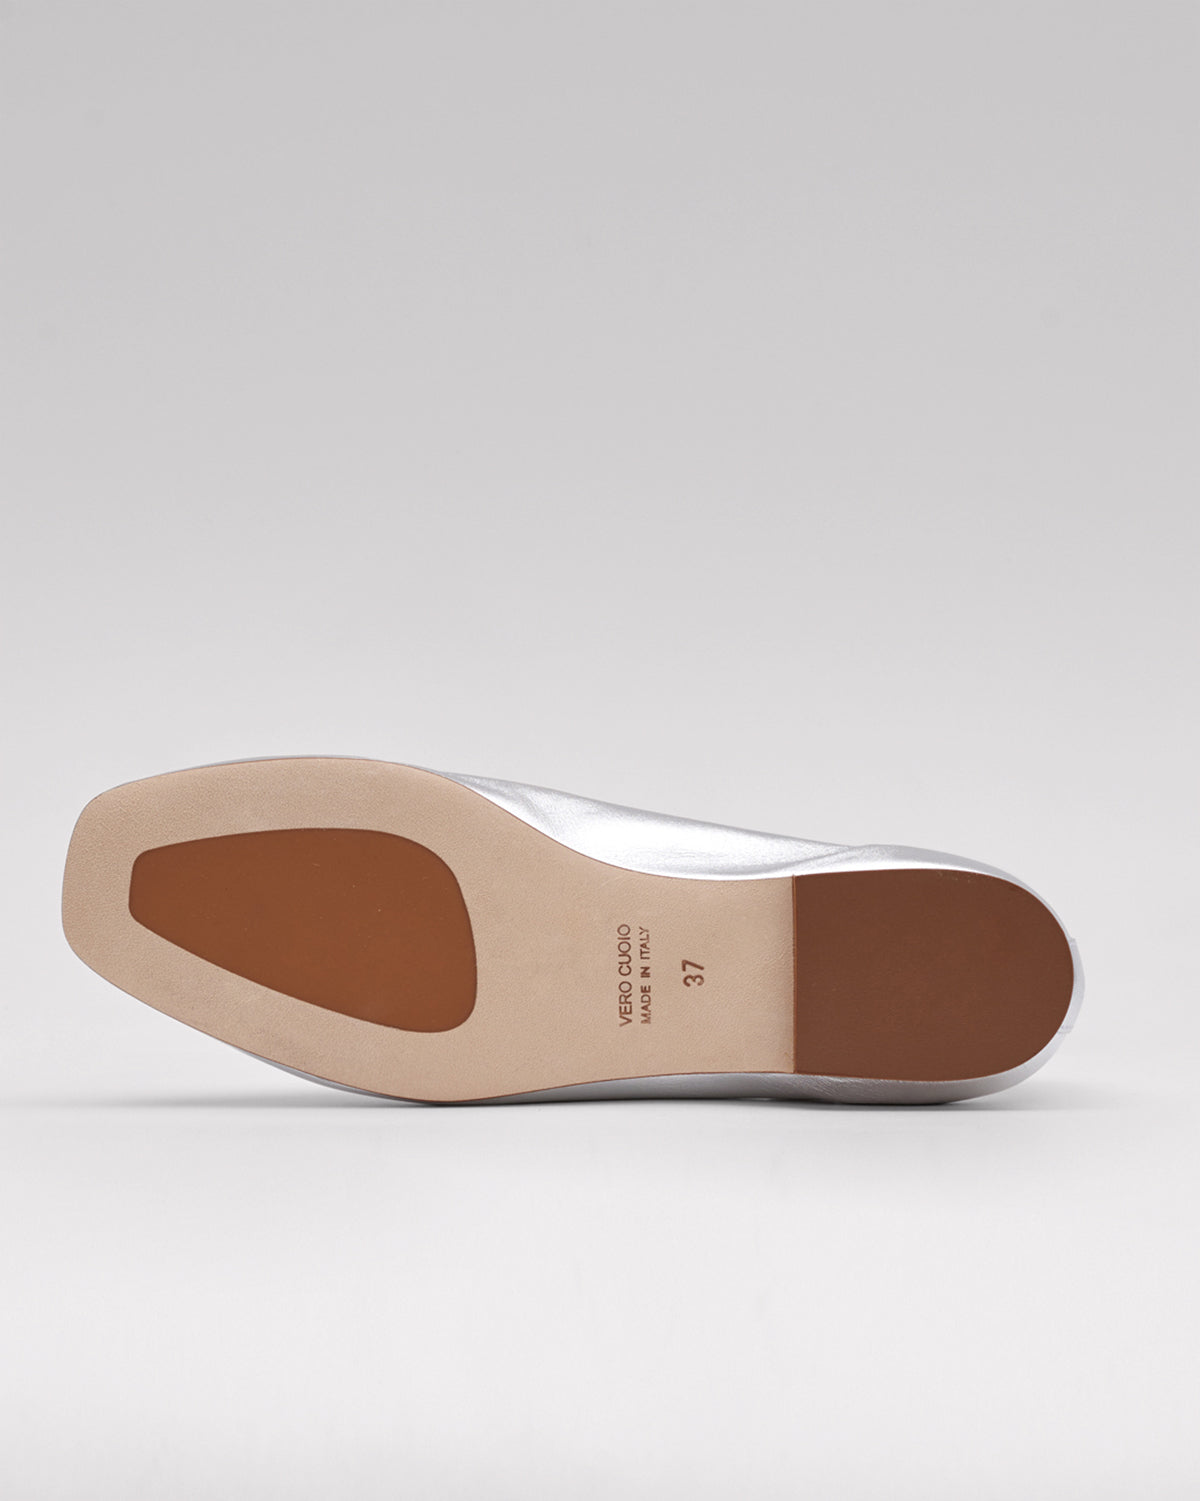 ivory leather flats made from sustainable materials